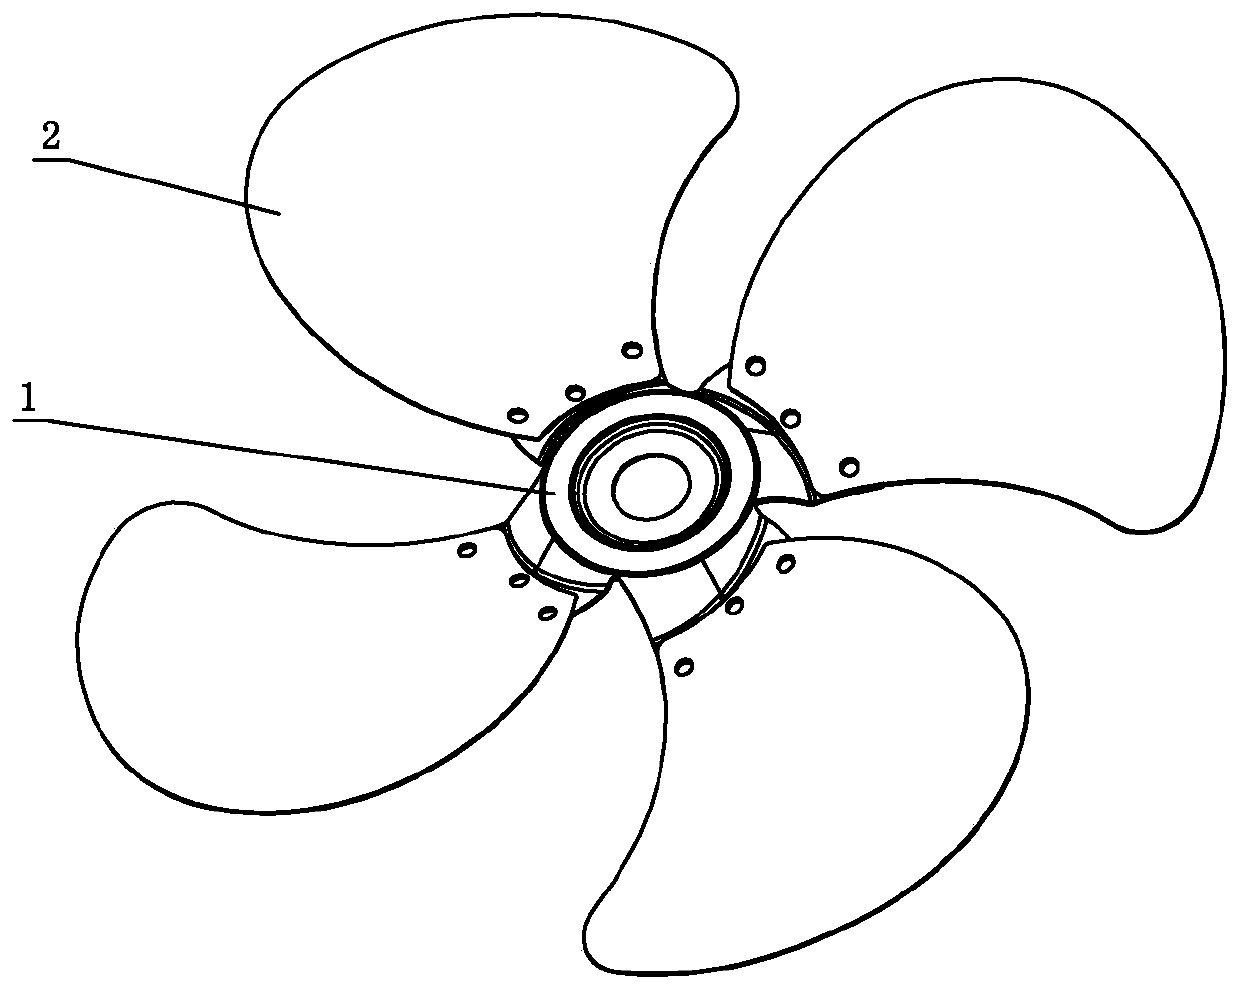 A commercial electric fan blade